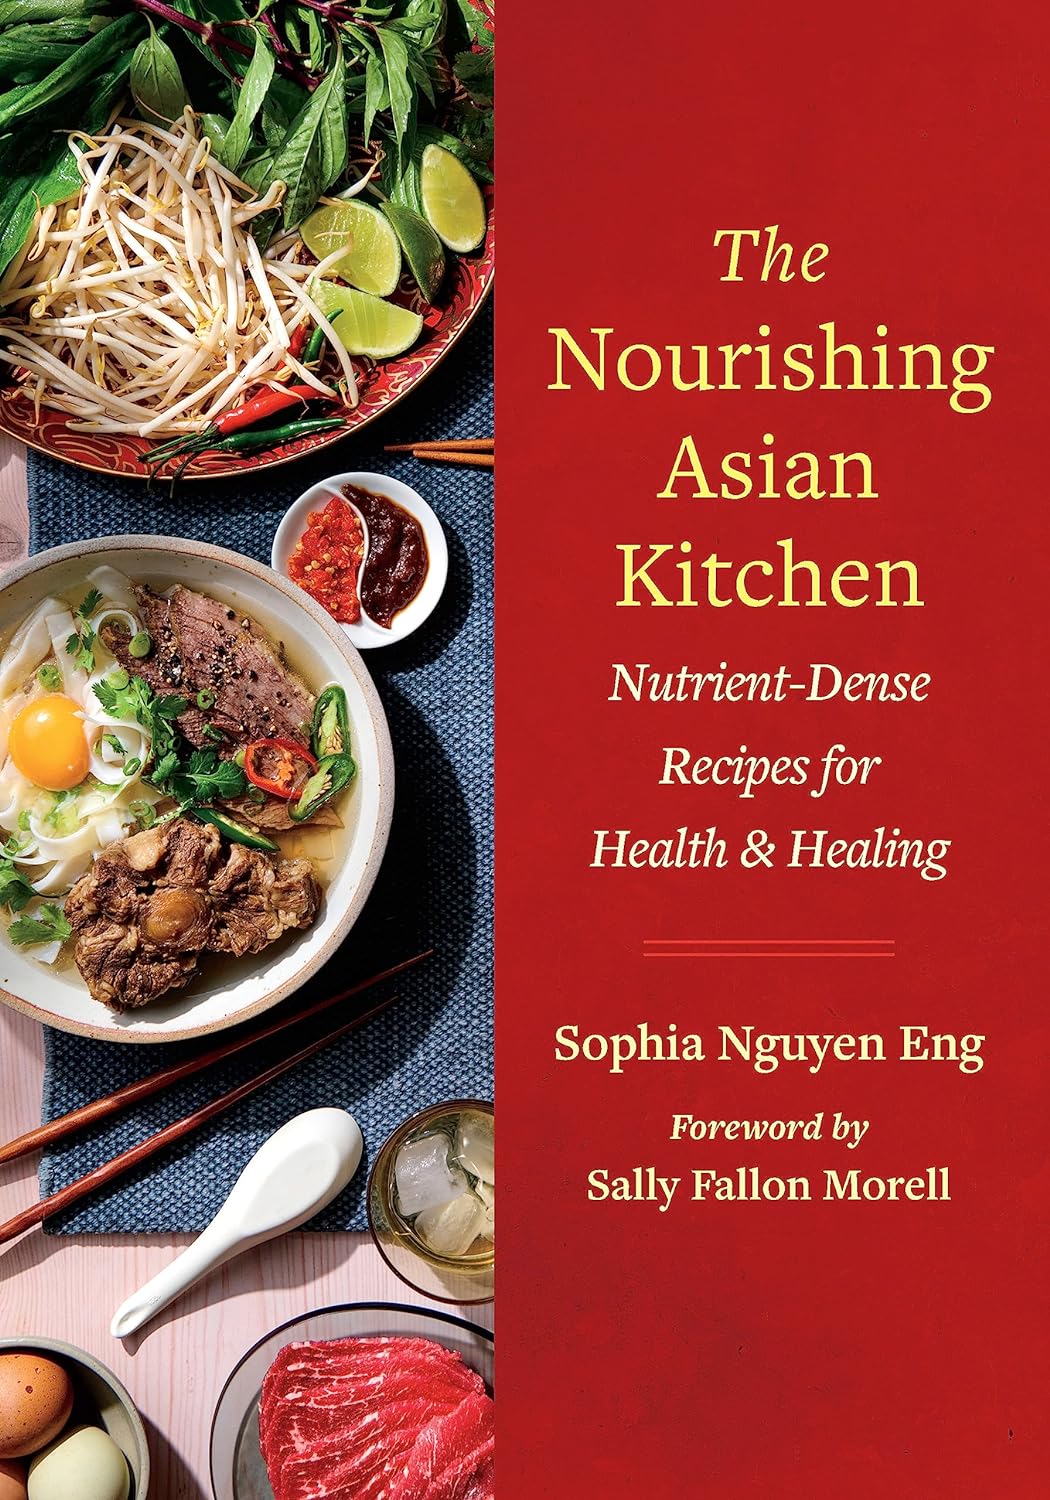 The Nourishing Asian Kitchen: Nutrient-Dense Recipes for Health and Healing (Sophia Nguyen Eng)